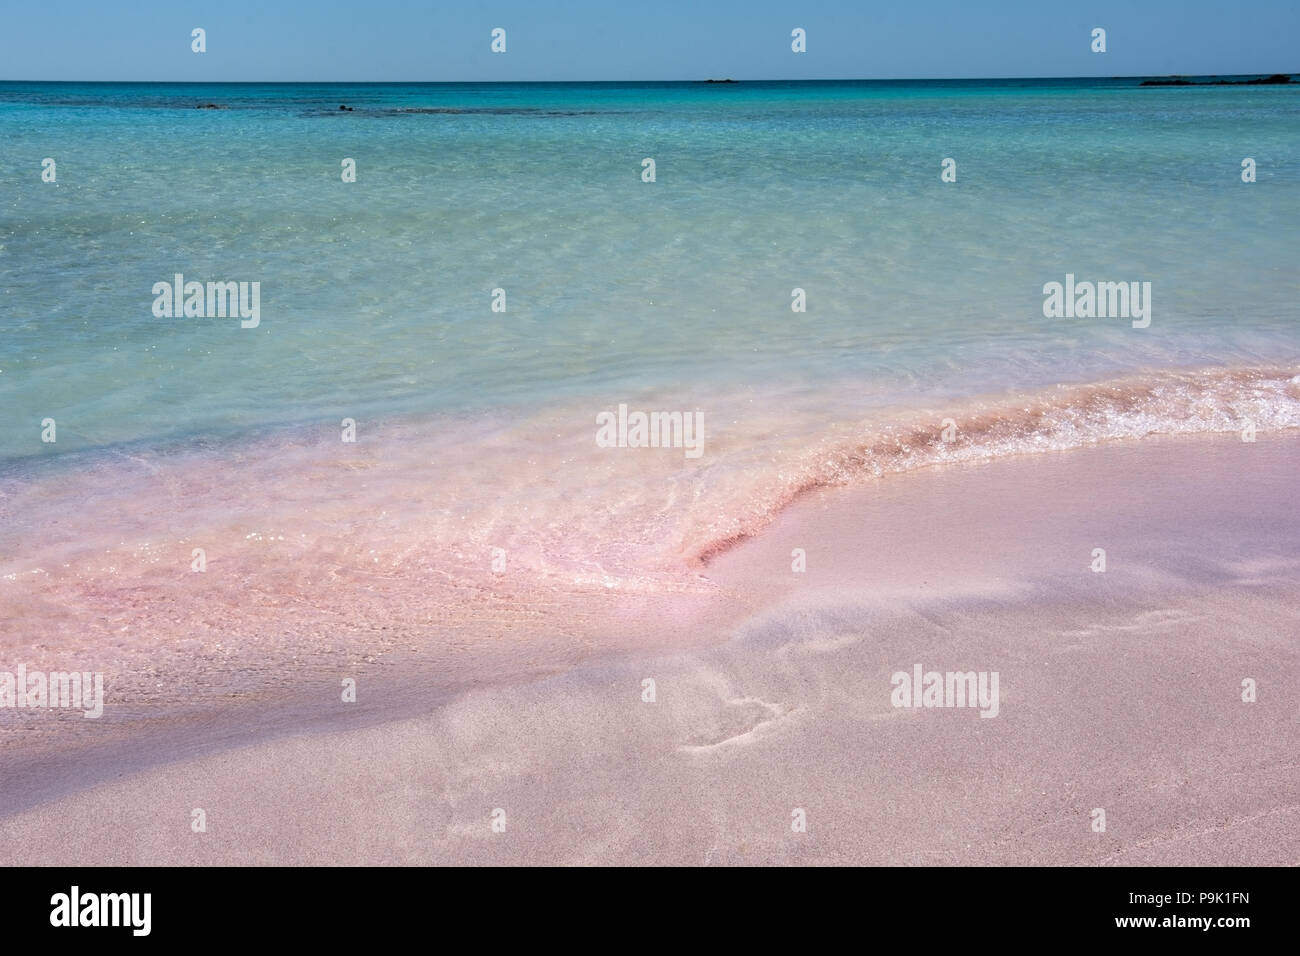 Pink fine sand beach at the turquoise sea in summer Stock Photo